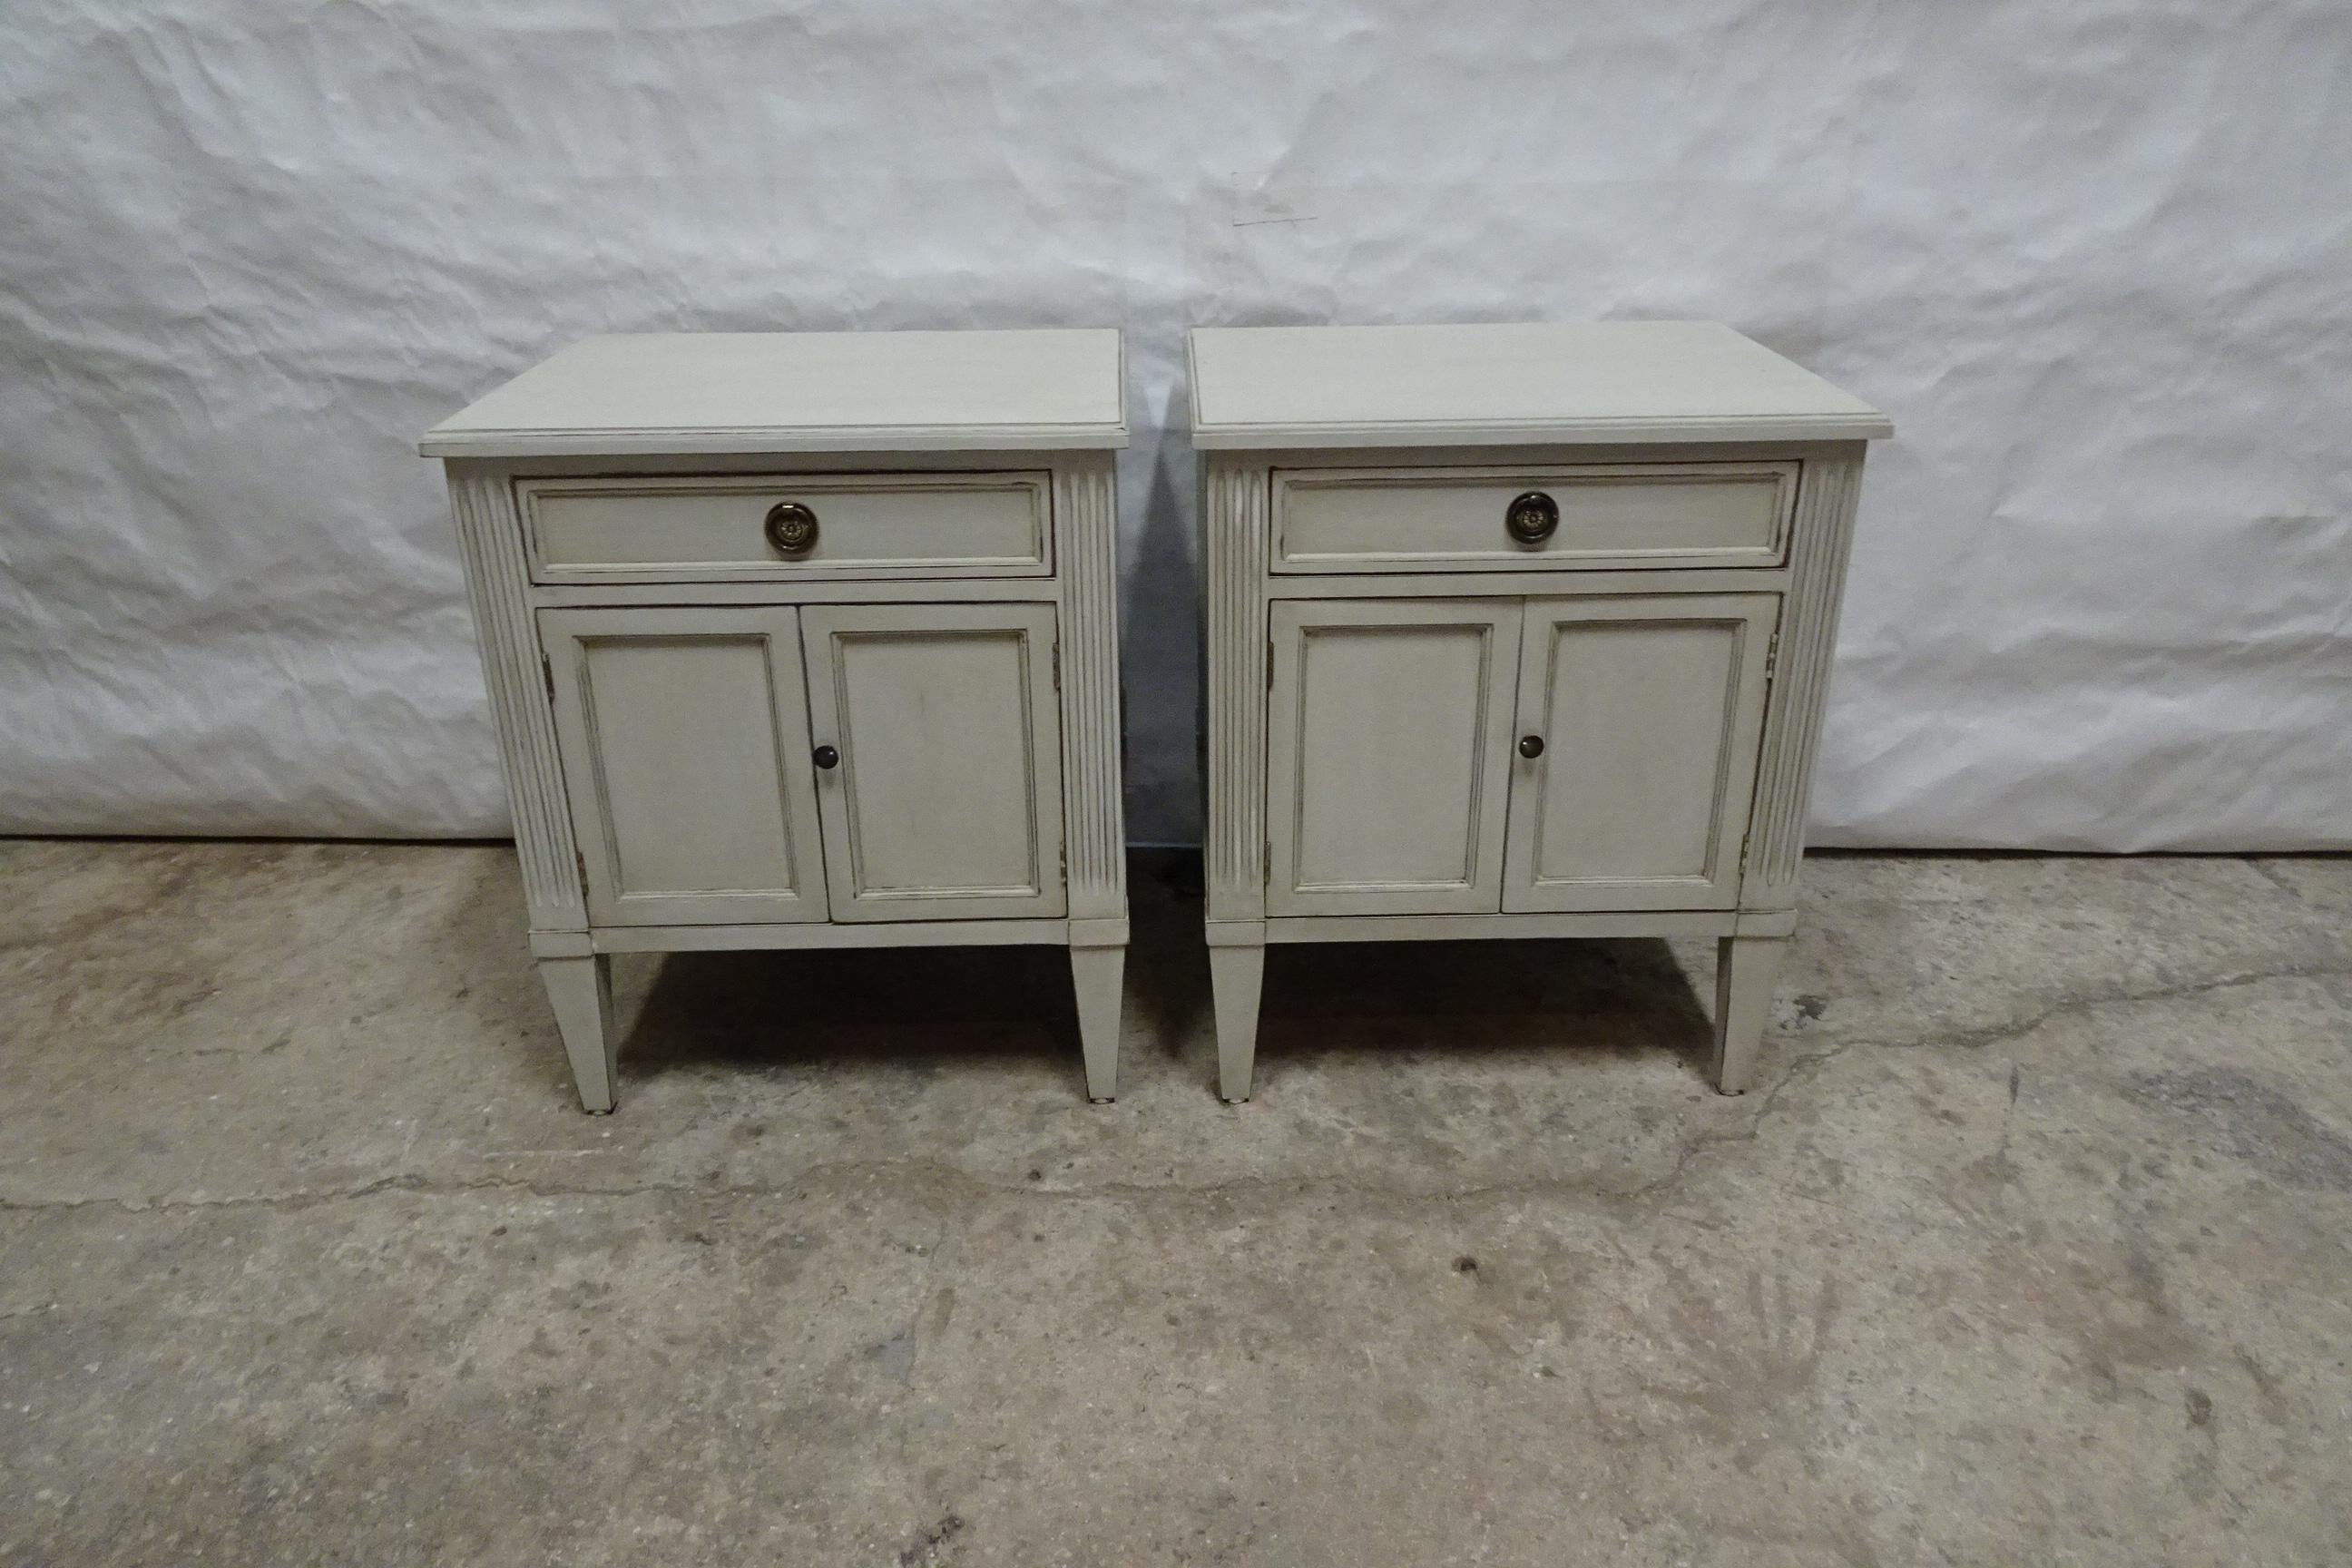 This is a unique set of Gustavian Style Night Stands. They have been restored and repainted with Milk paints 